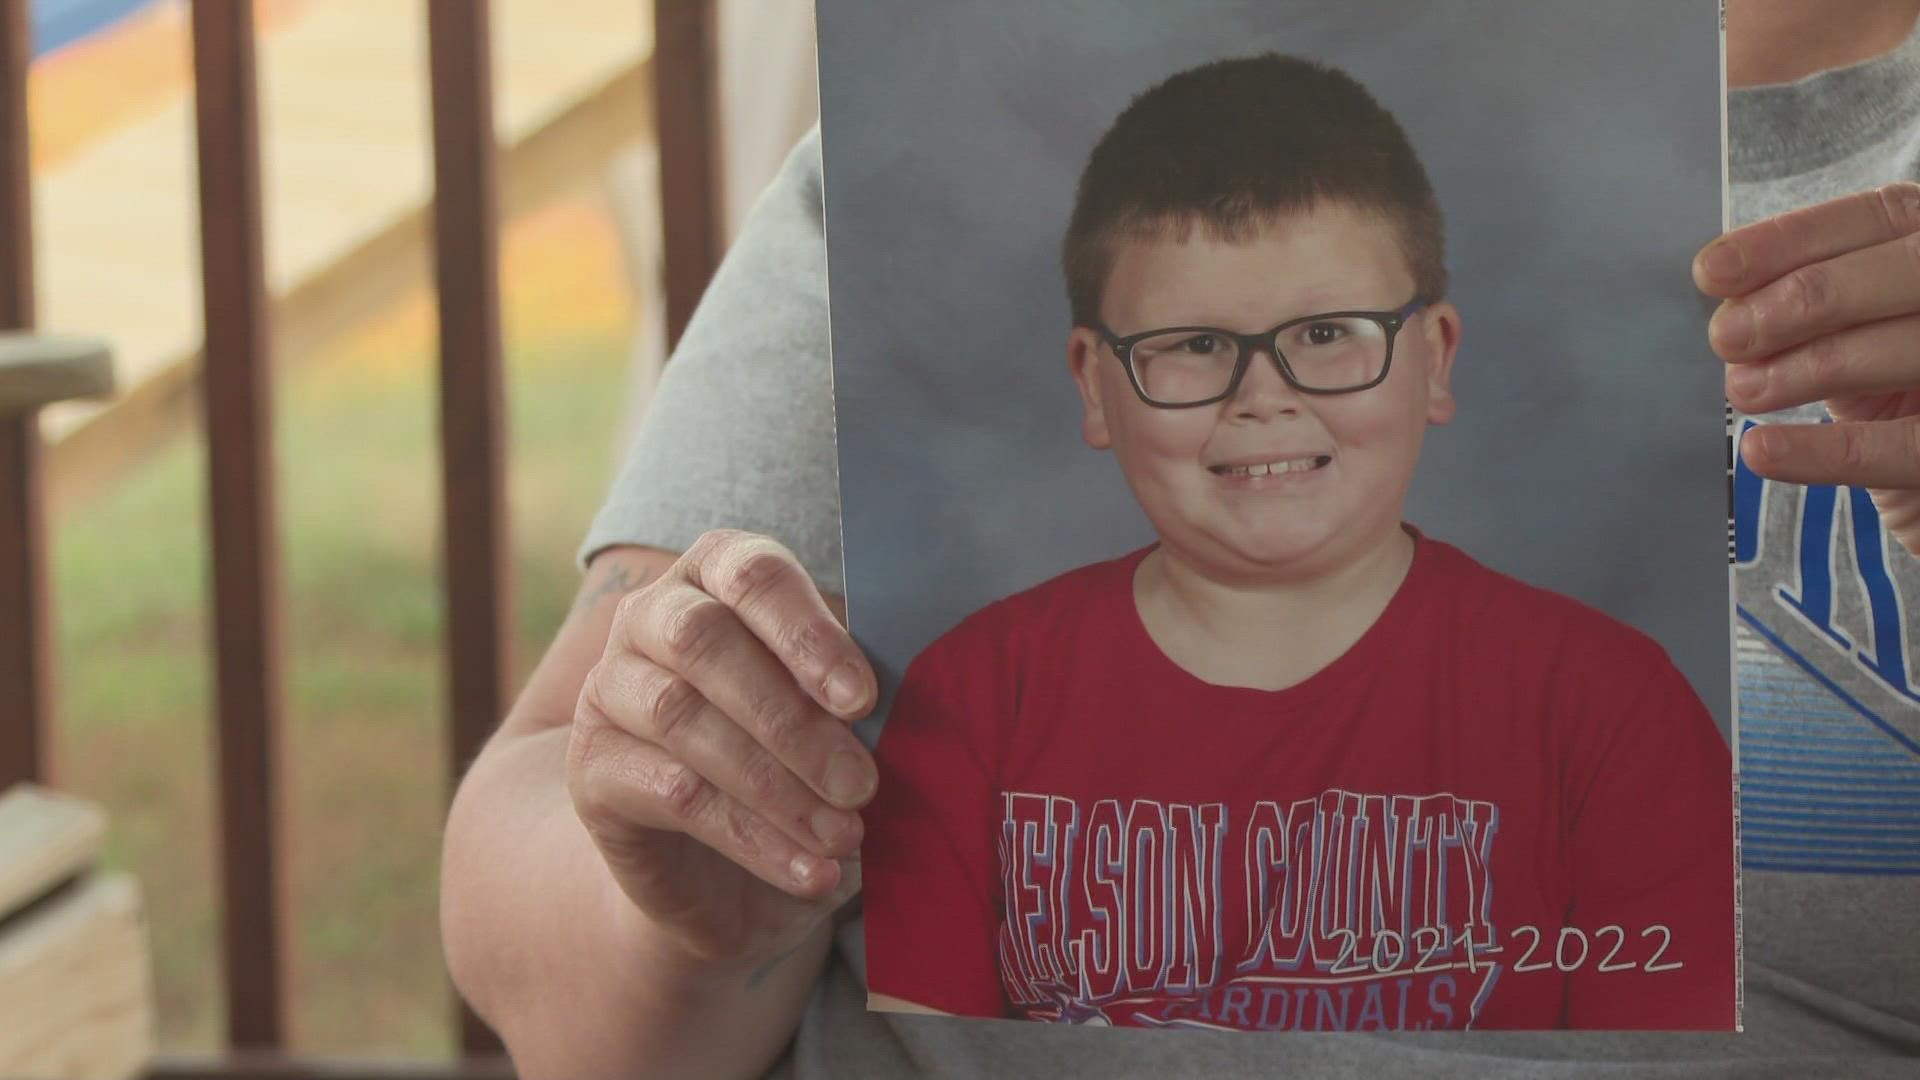 Landon McCubbins passed away after an accident at the Boston School on Monday, his family says.